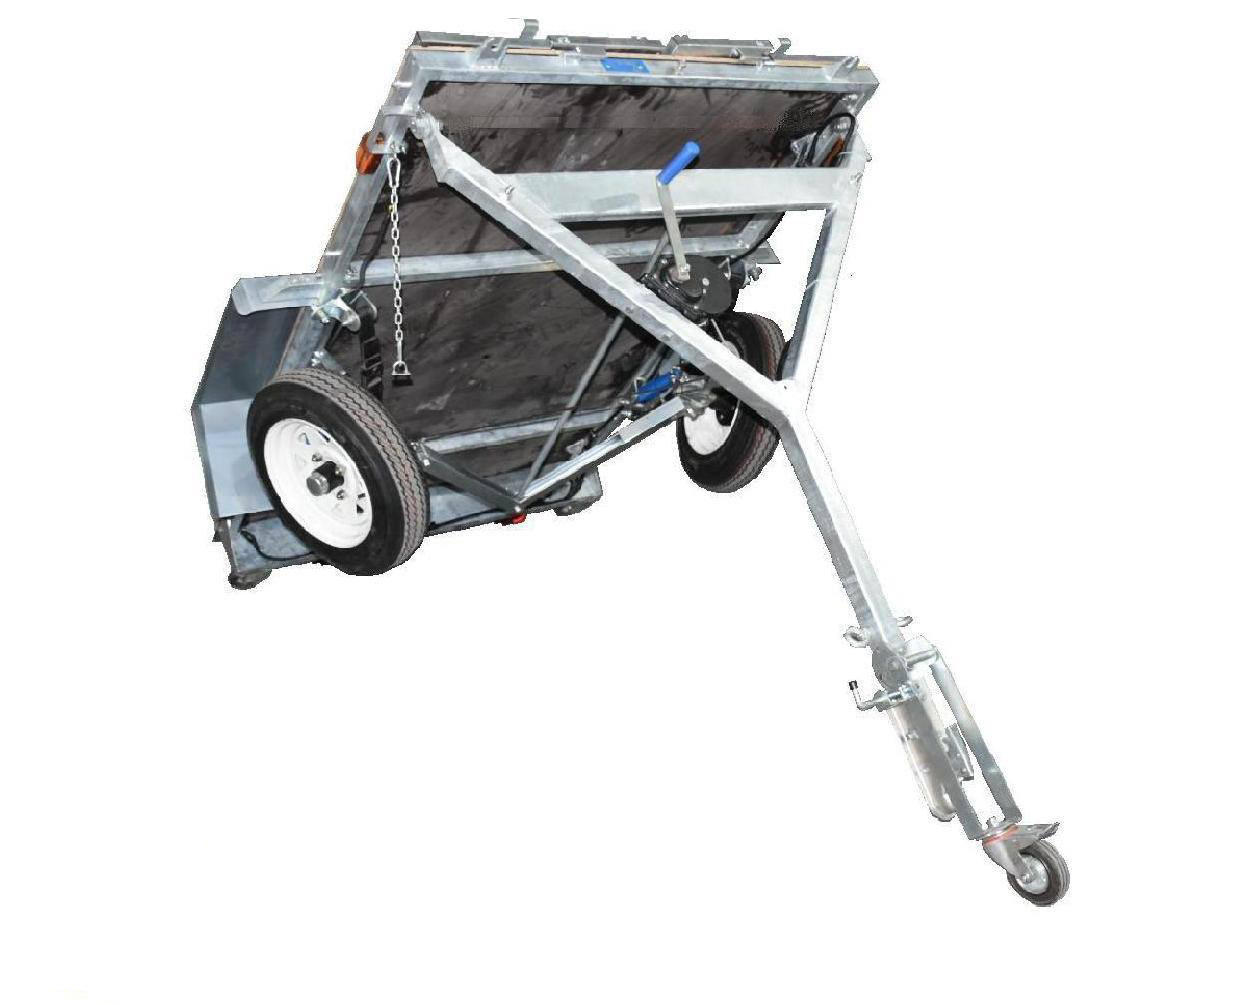 Snowaves Mechanical newly foldable trailer for trips